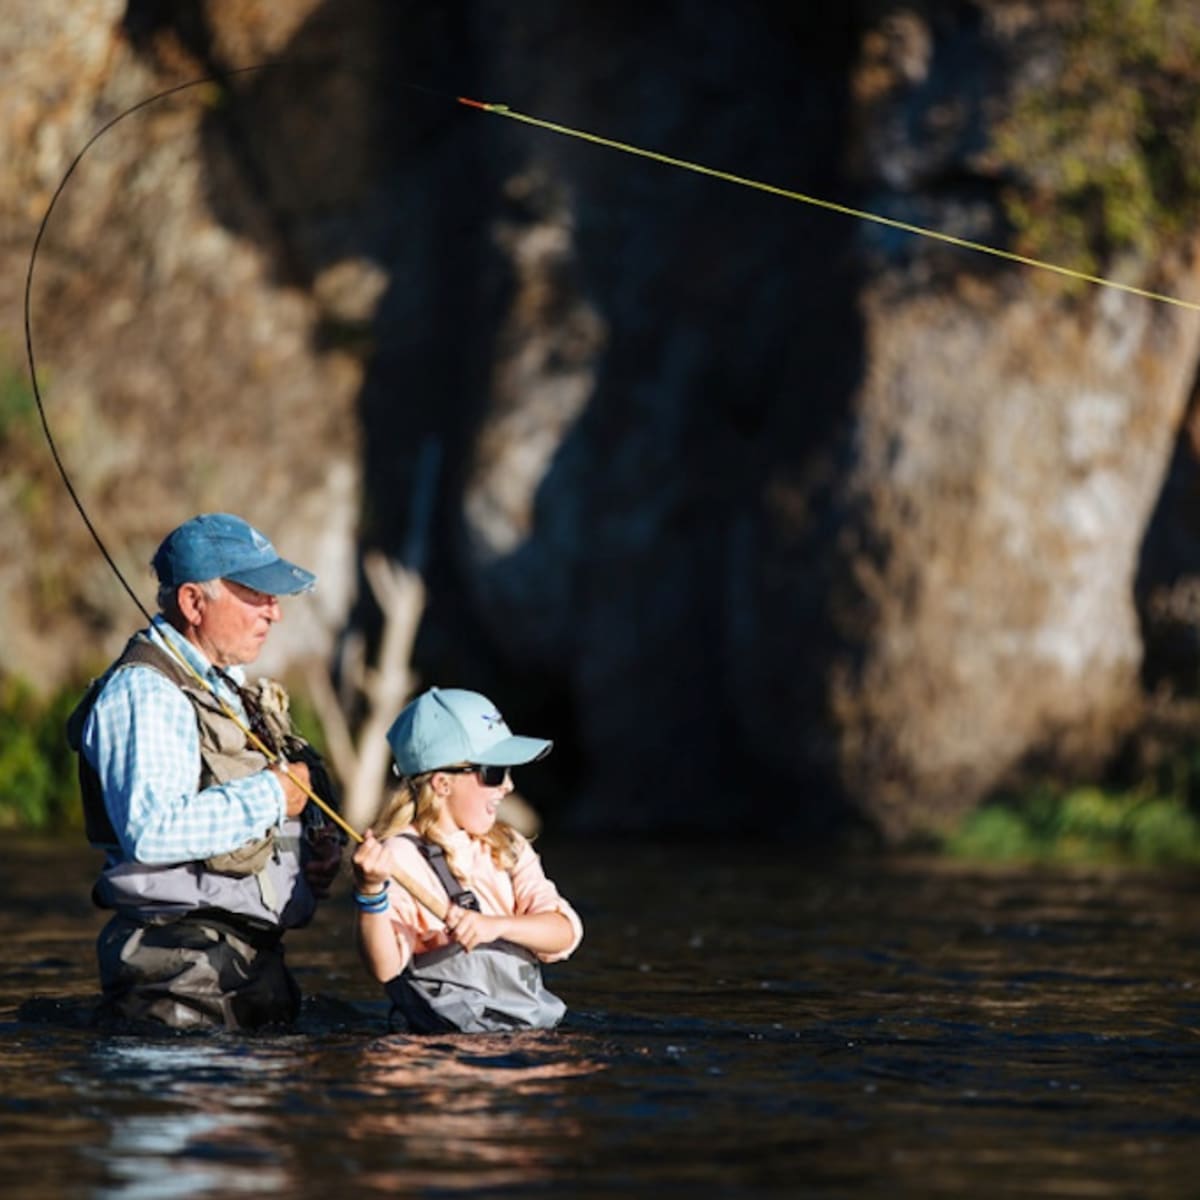 Simple fly-fishing with Patagonia founder Yvon Chouinard - Men's Journal